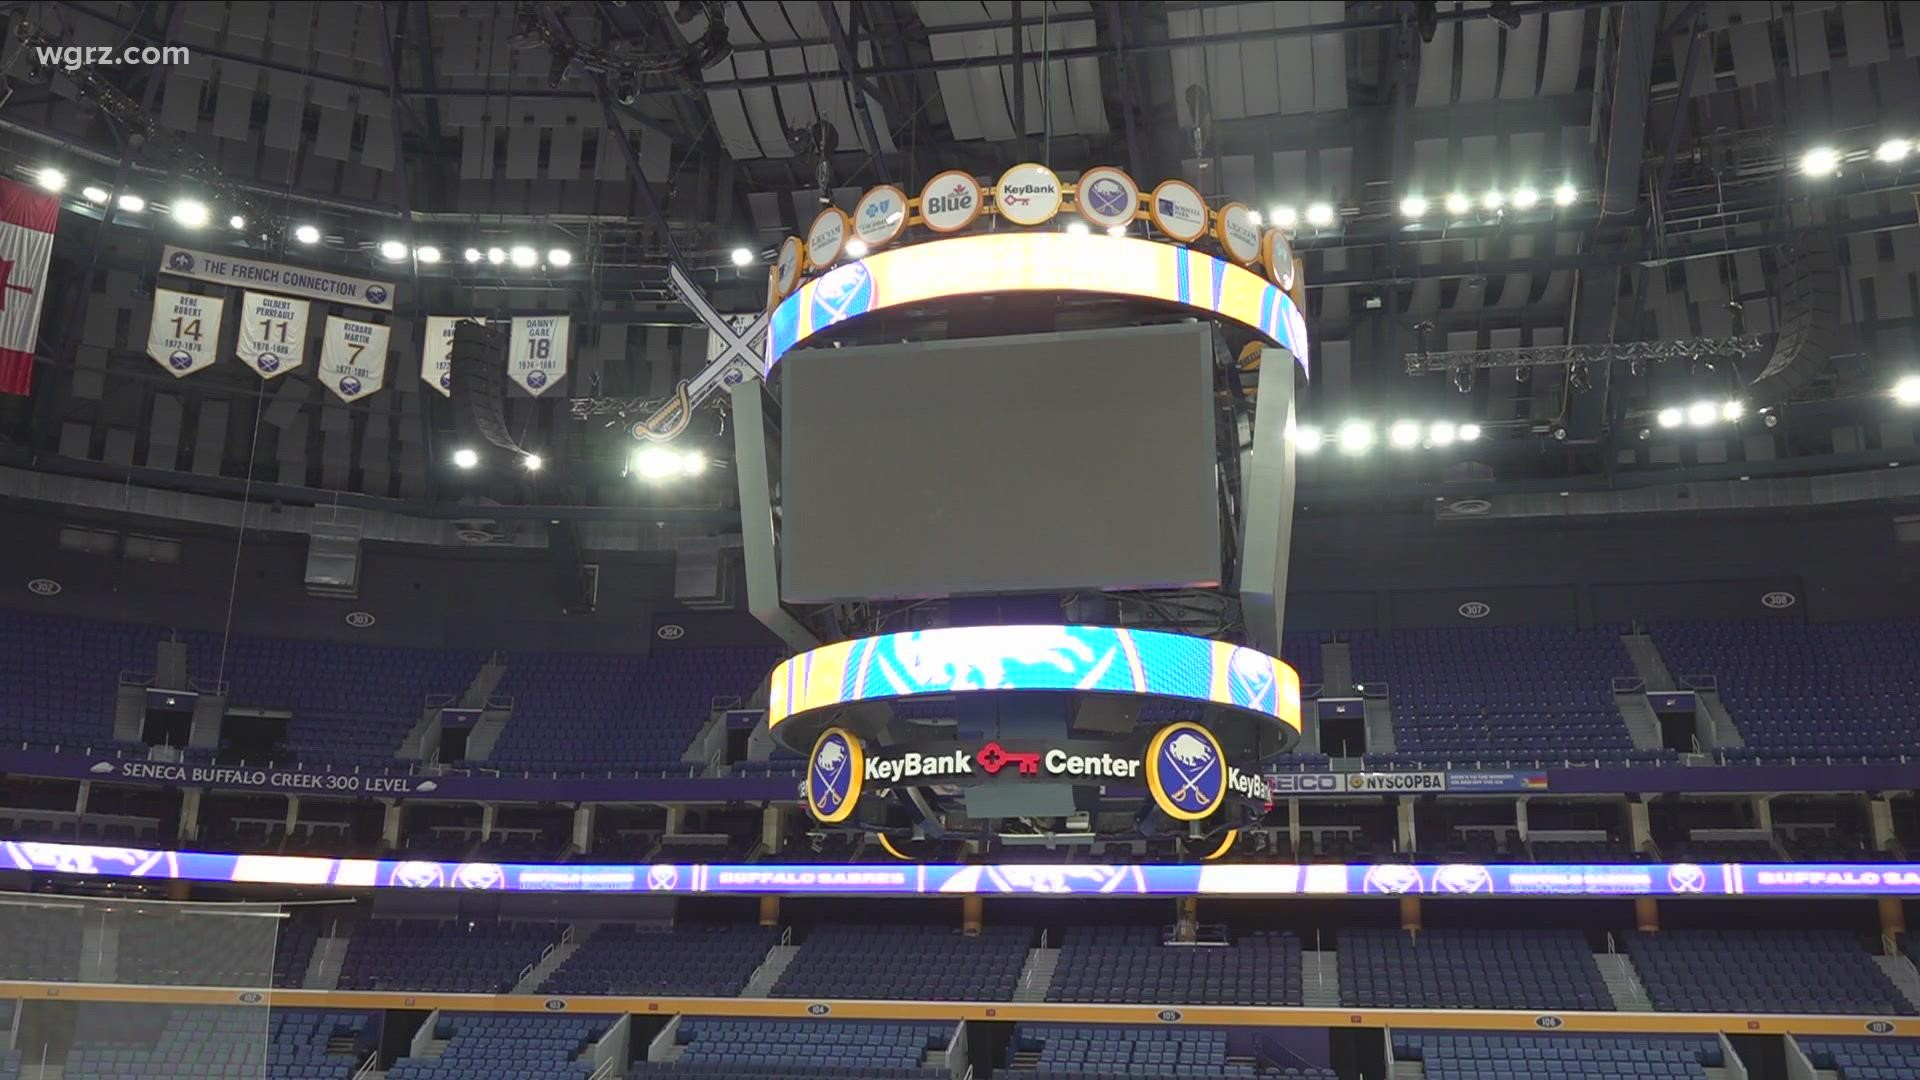 The Buffalo Sabres give fans an update on new regulations and a peek at the new upgrades made to Key Bank Center ahead of the season opener.